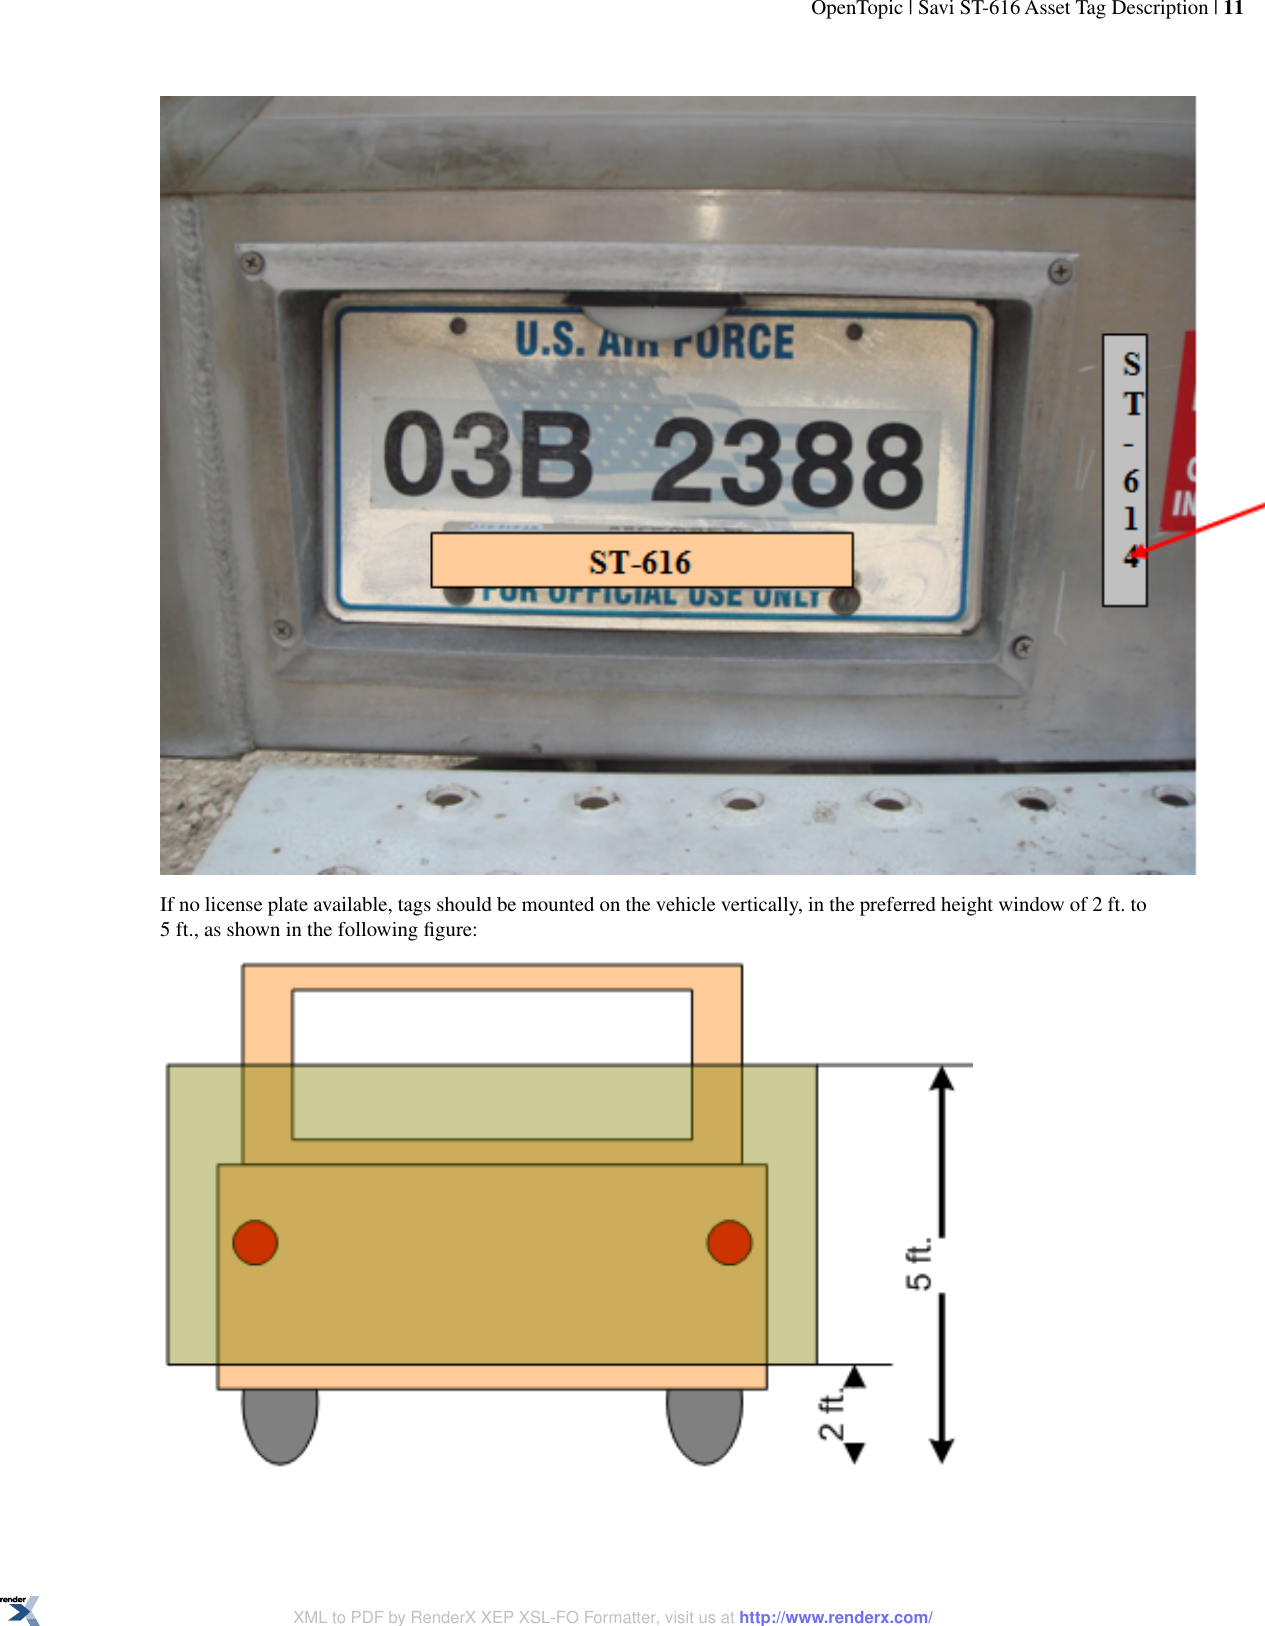 If no license plate available, tags should be mounted on the vehicle vertically, in the preferred height window of 2 ft. to5 ft., as shown in the following ﬁgure:OpenTopic | Savi ST-616 Asset Tag Description | 11XML to PDF by RenderX XEP XSL-FO Formatter, visit us at http://www.renderx.com/